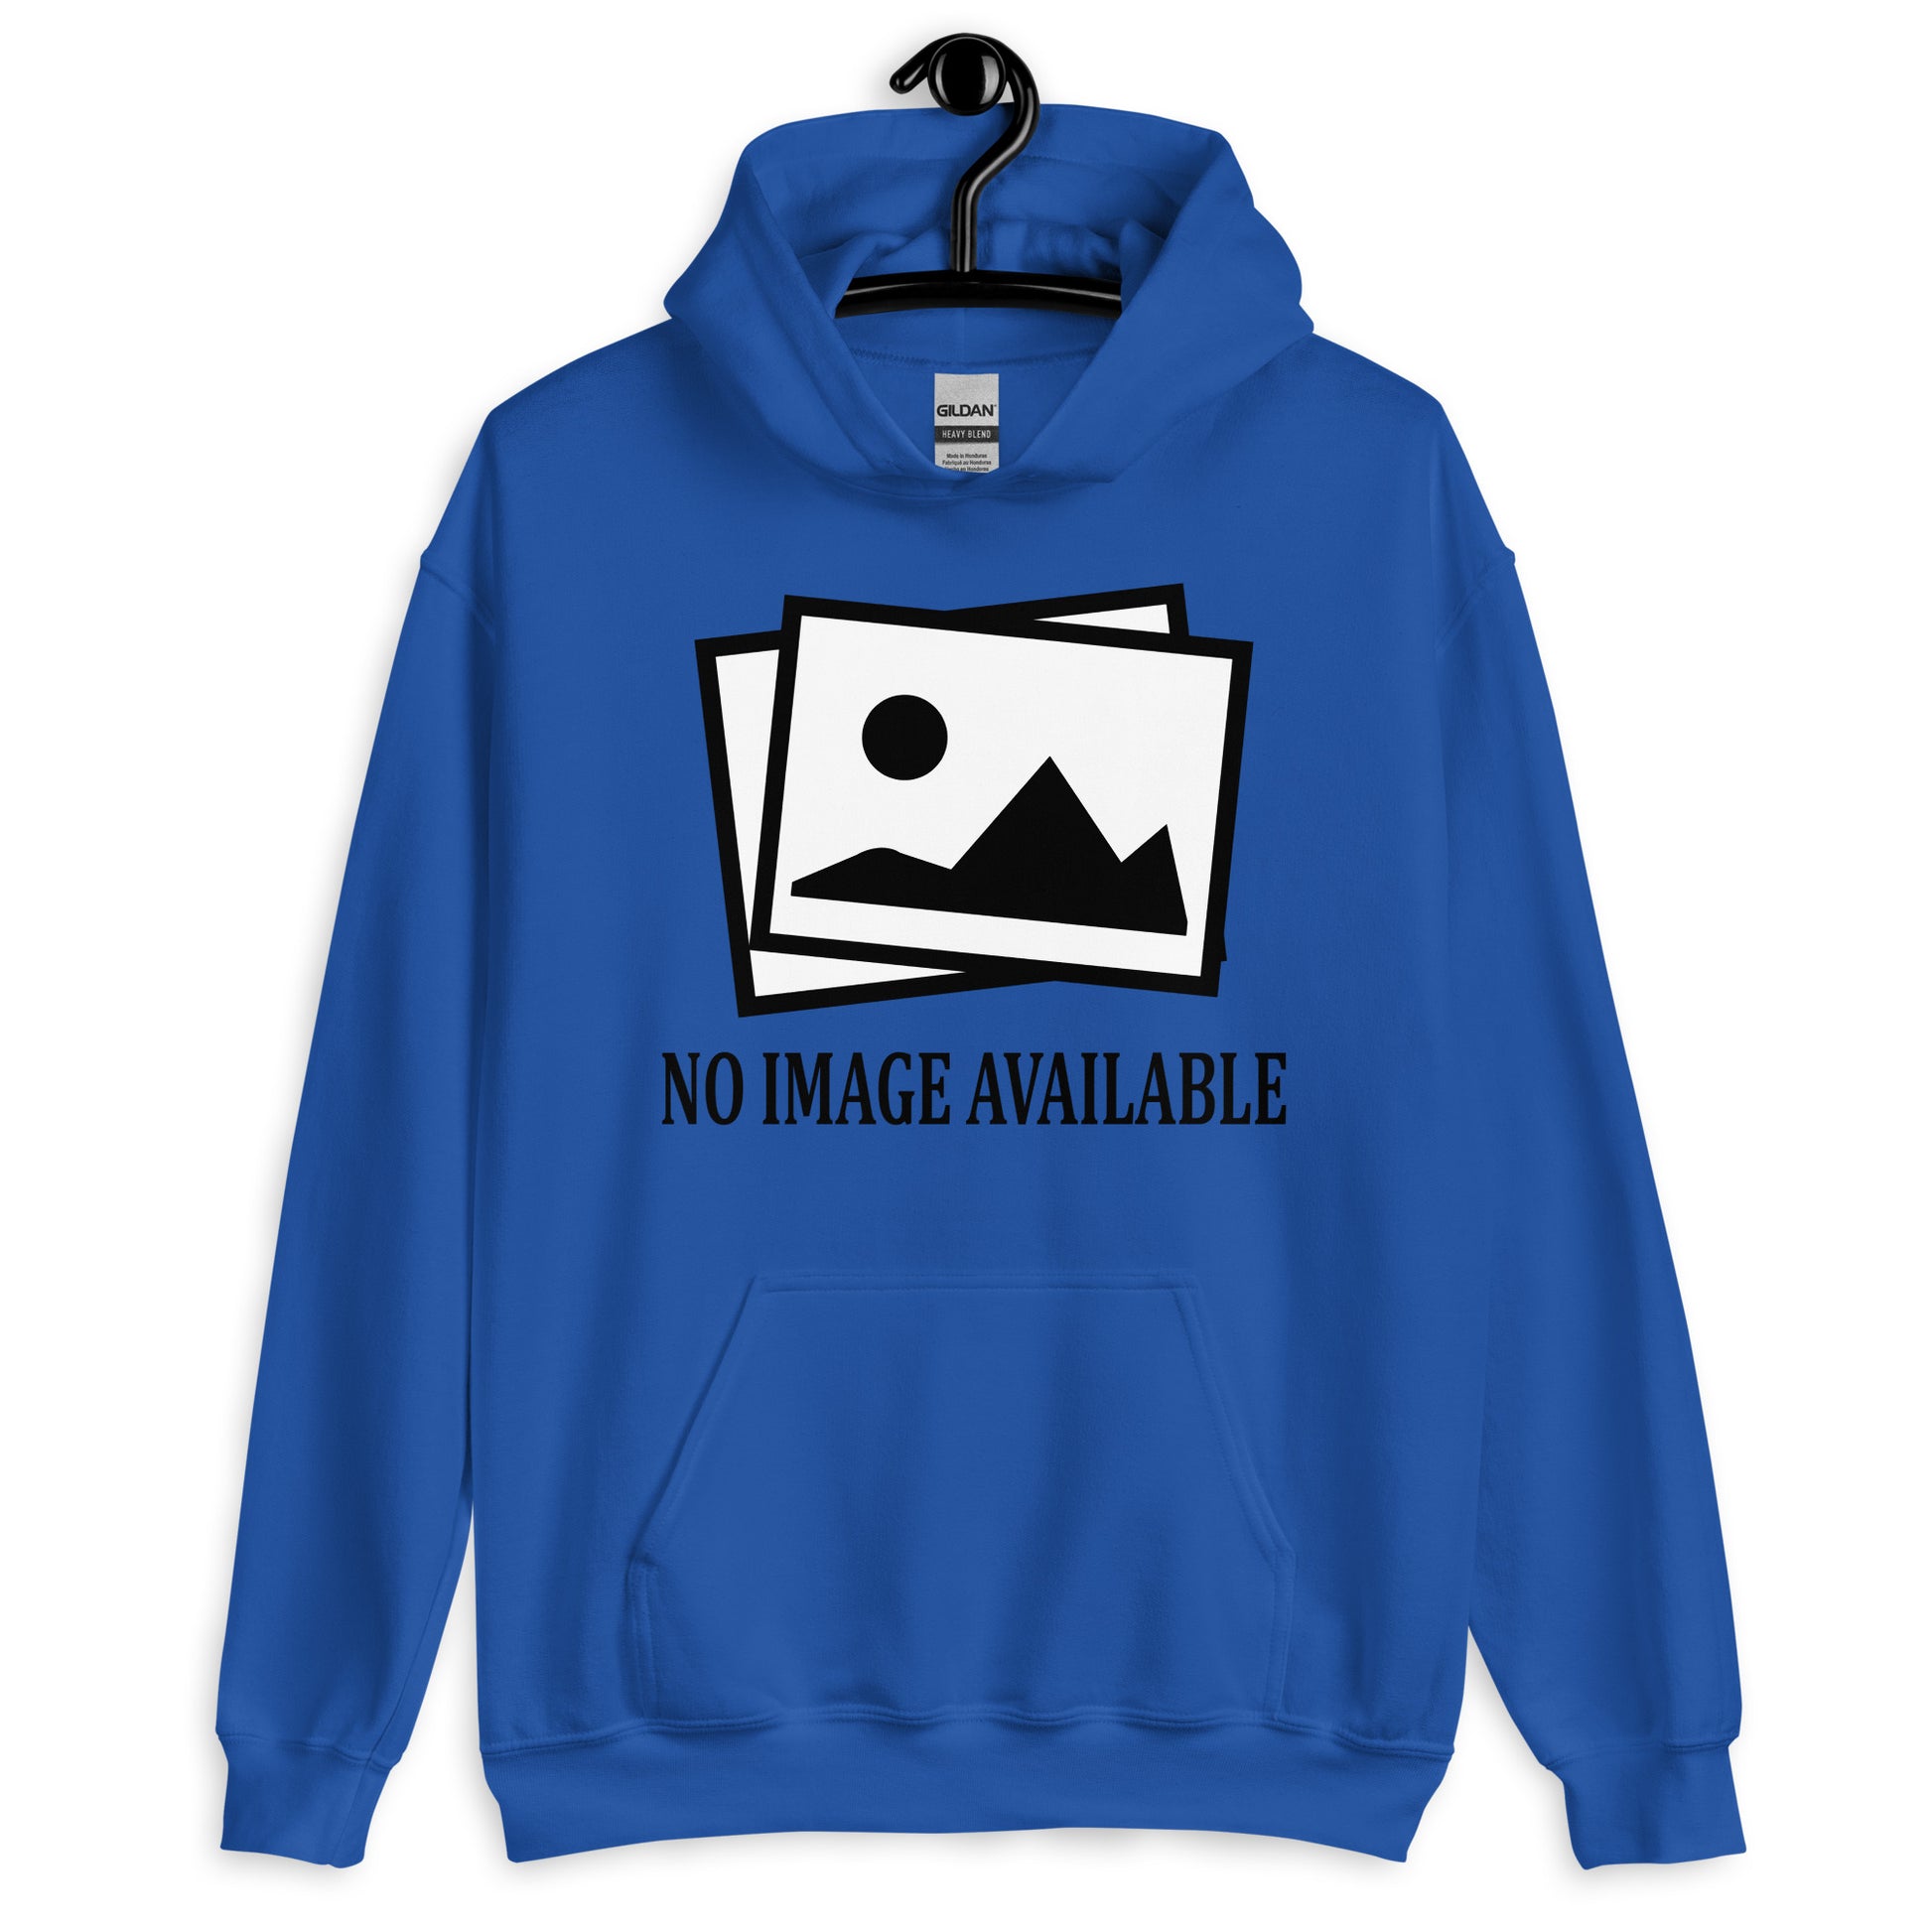 royal blue hoodie with image and text "no image available"